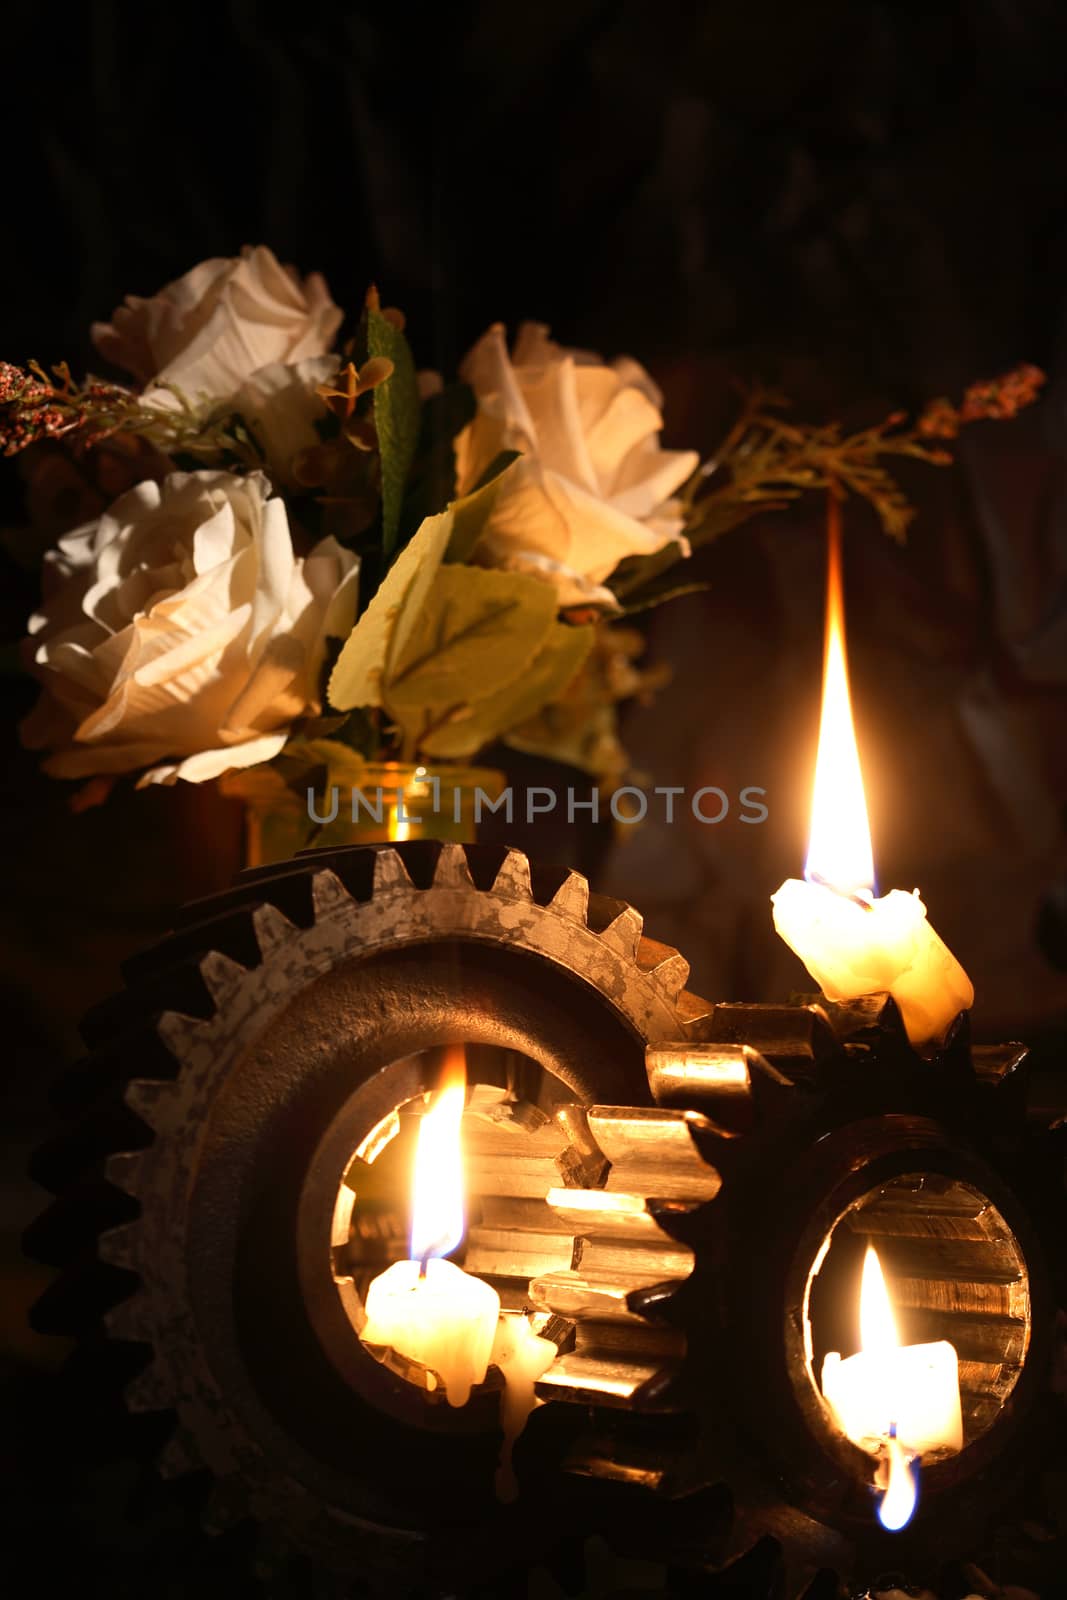 Lighting candles on old gears near roses against dark background